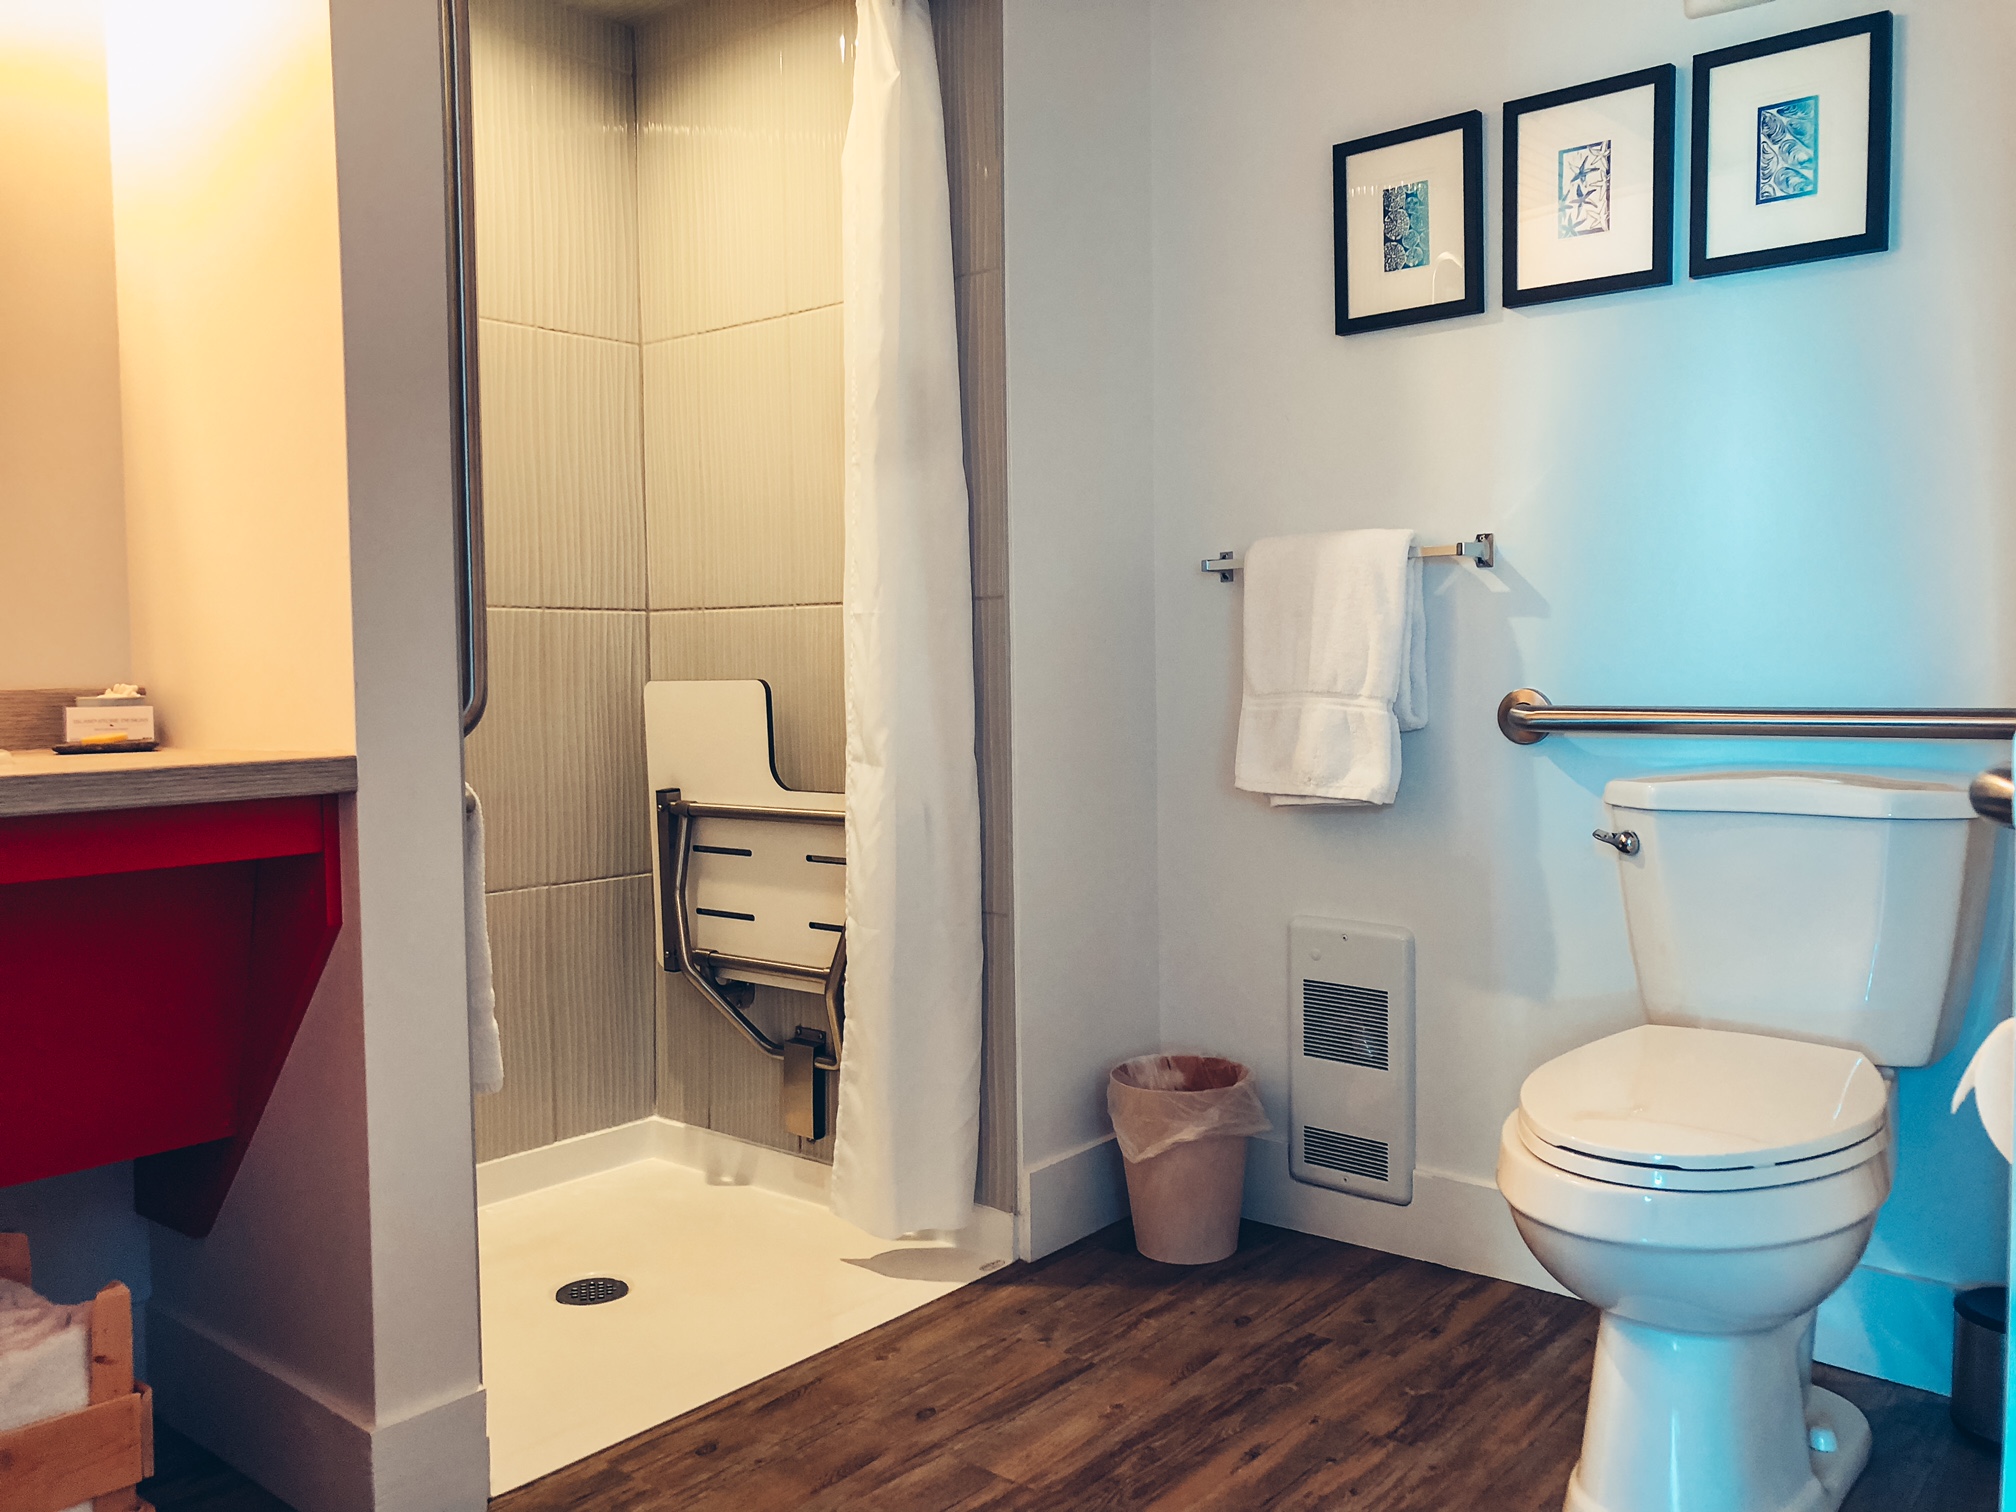 A photo of the bathroom. In the right corner there is a toilet with one of the 2 grabs bars visible. Next to it is a towel rack and beside that is a roll in shower with a bench that is folded up into the wall.